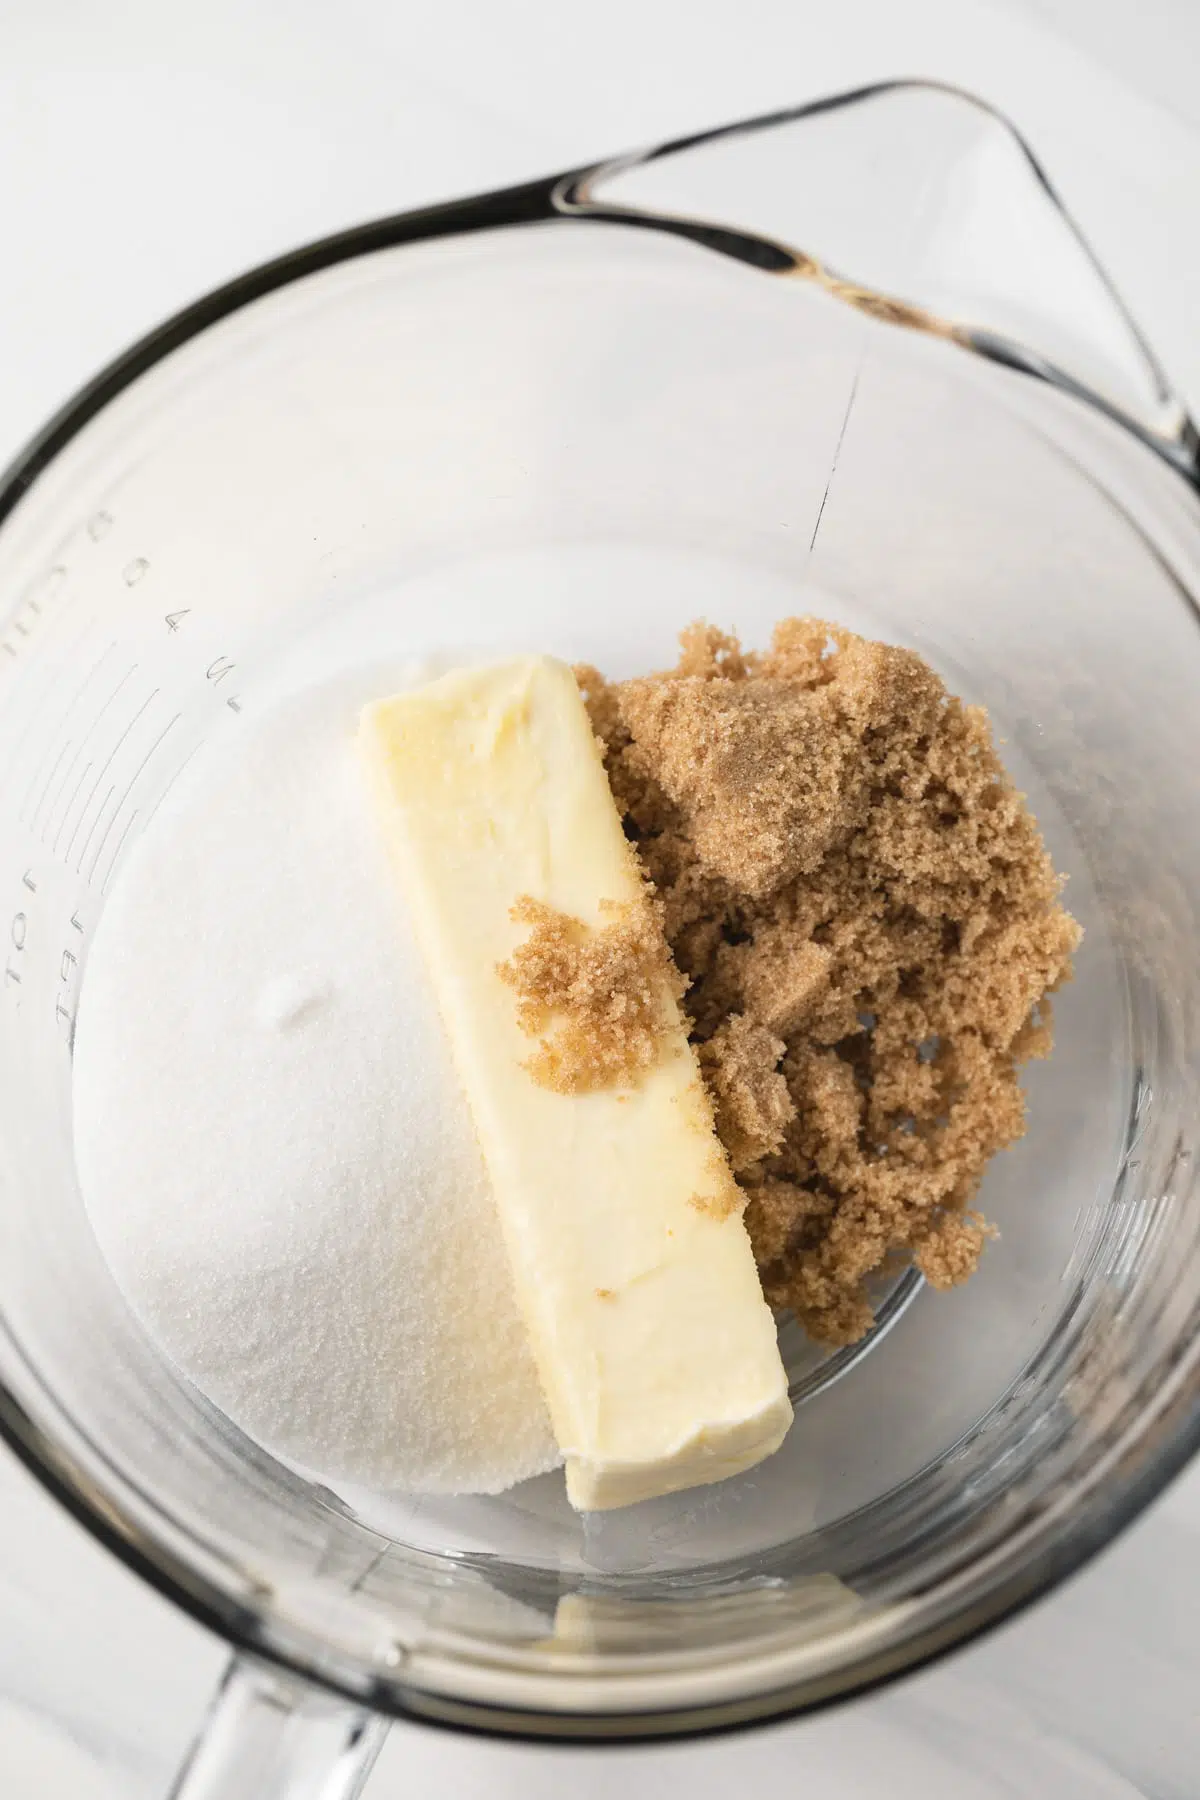 Butter, sugar, and brown sugar in a glass bowl.